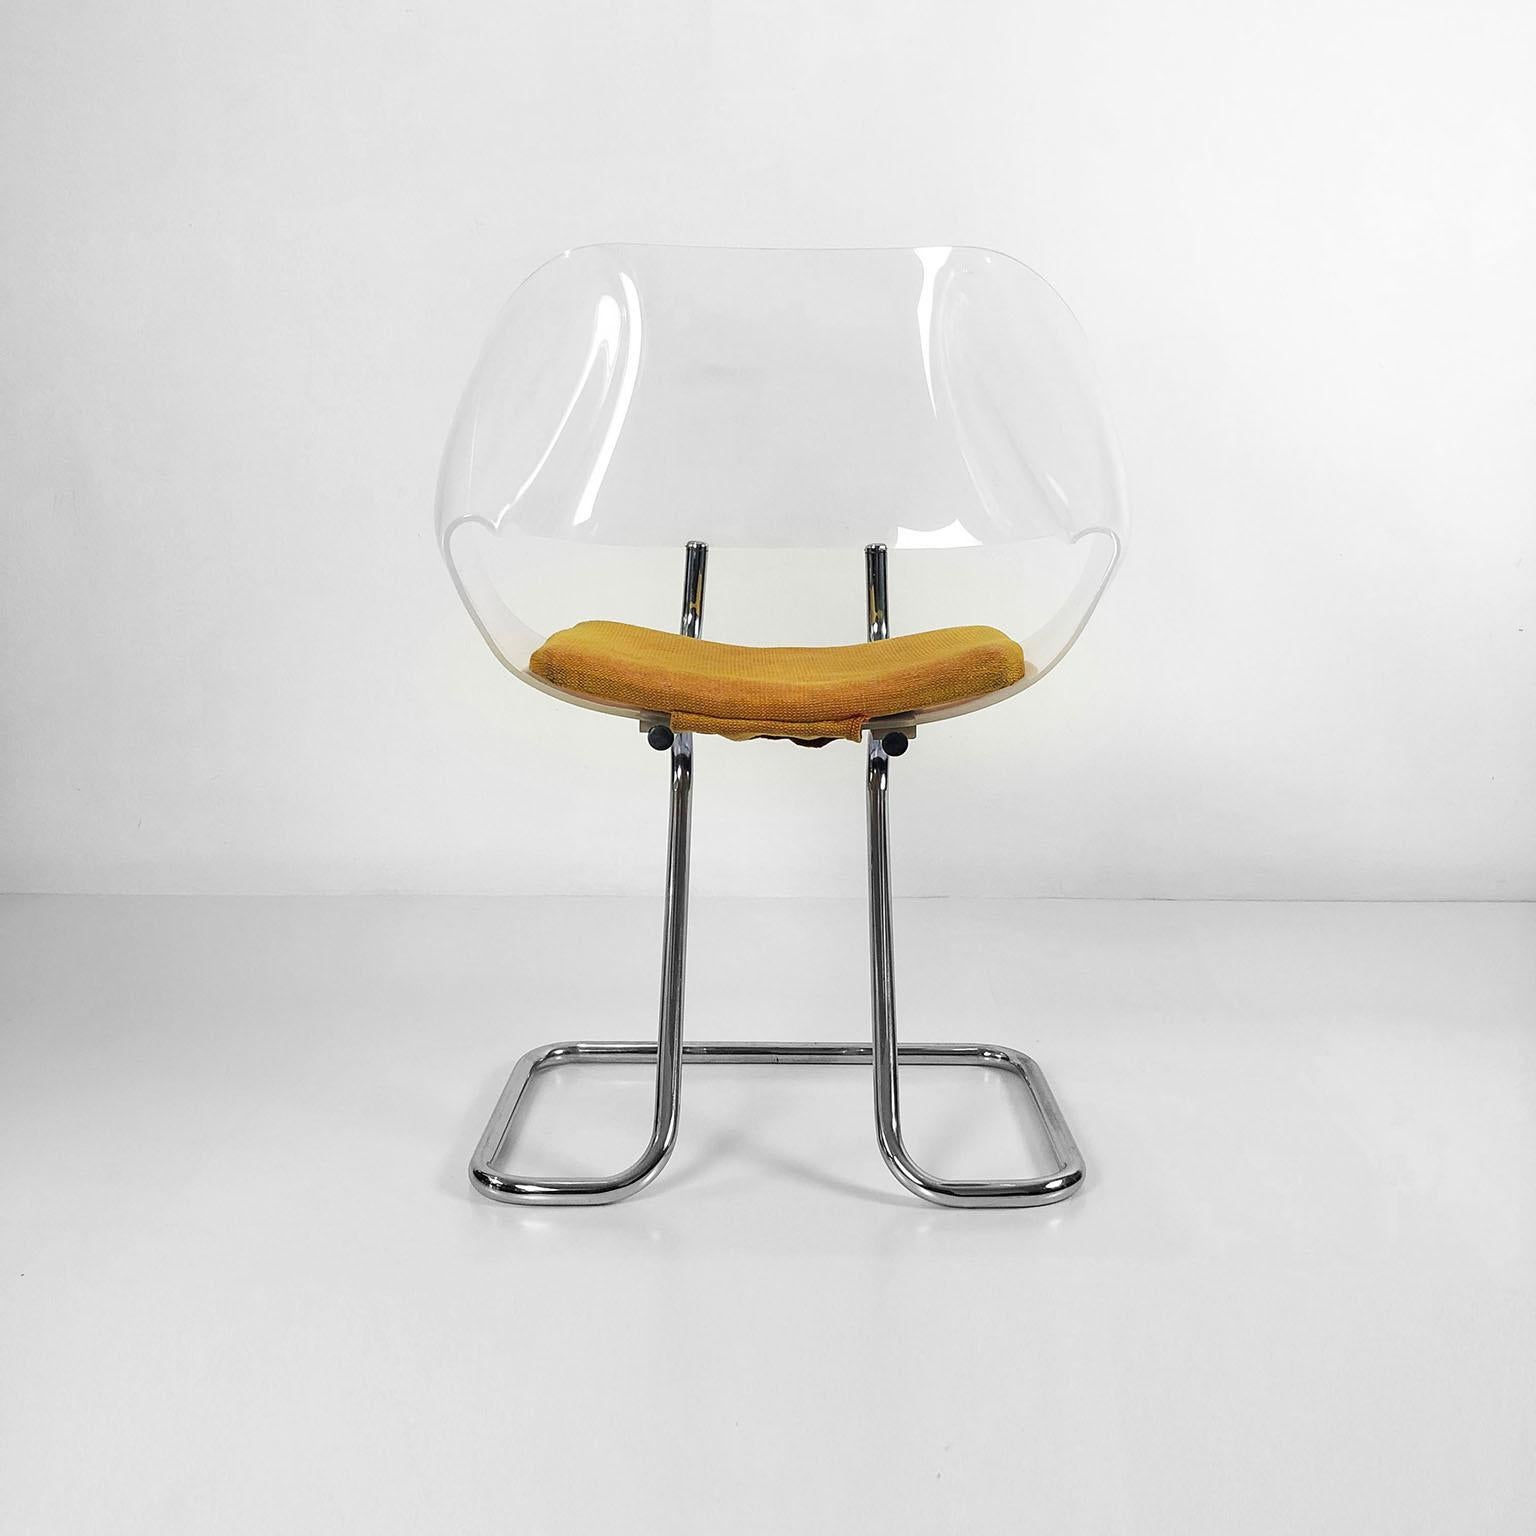 We offer this set of 4 chairs in acrylic and chromed tubular steel with amazing design, circa 1970.